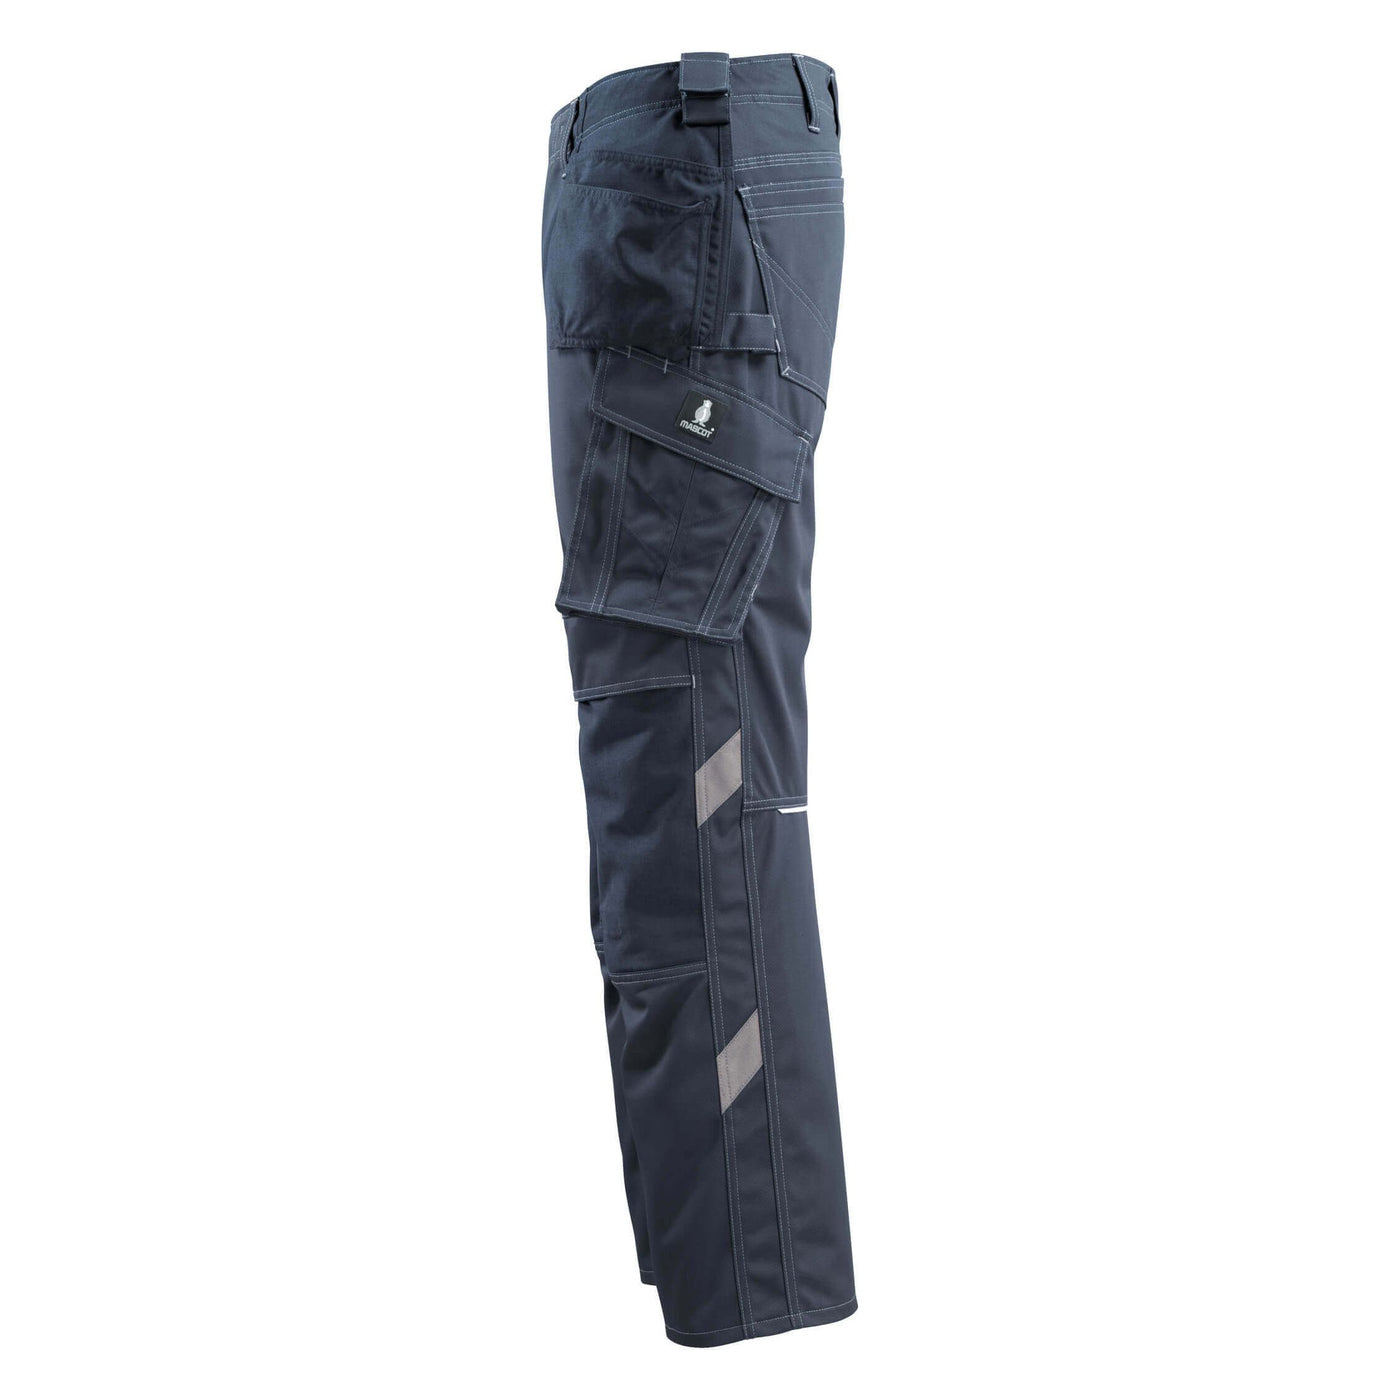 Mascot Bremen Trousers Knee-Pad Holster-Pockets 14131-203 Right #colour_dark-navy-blue